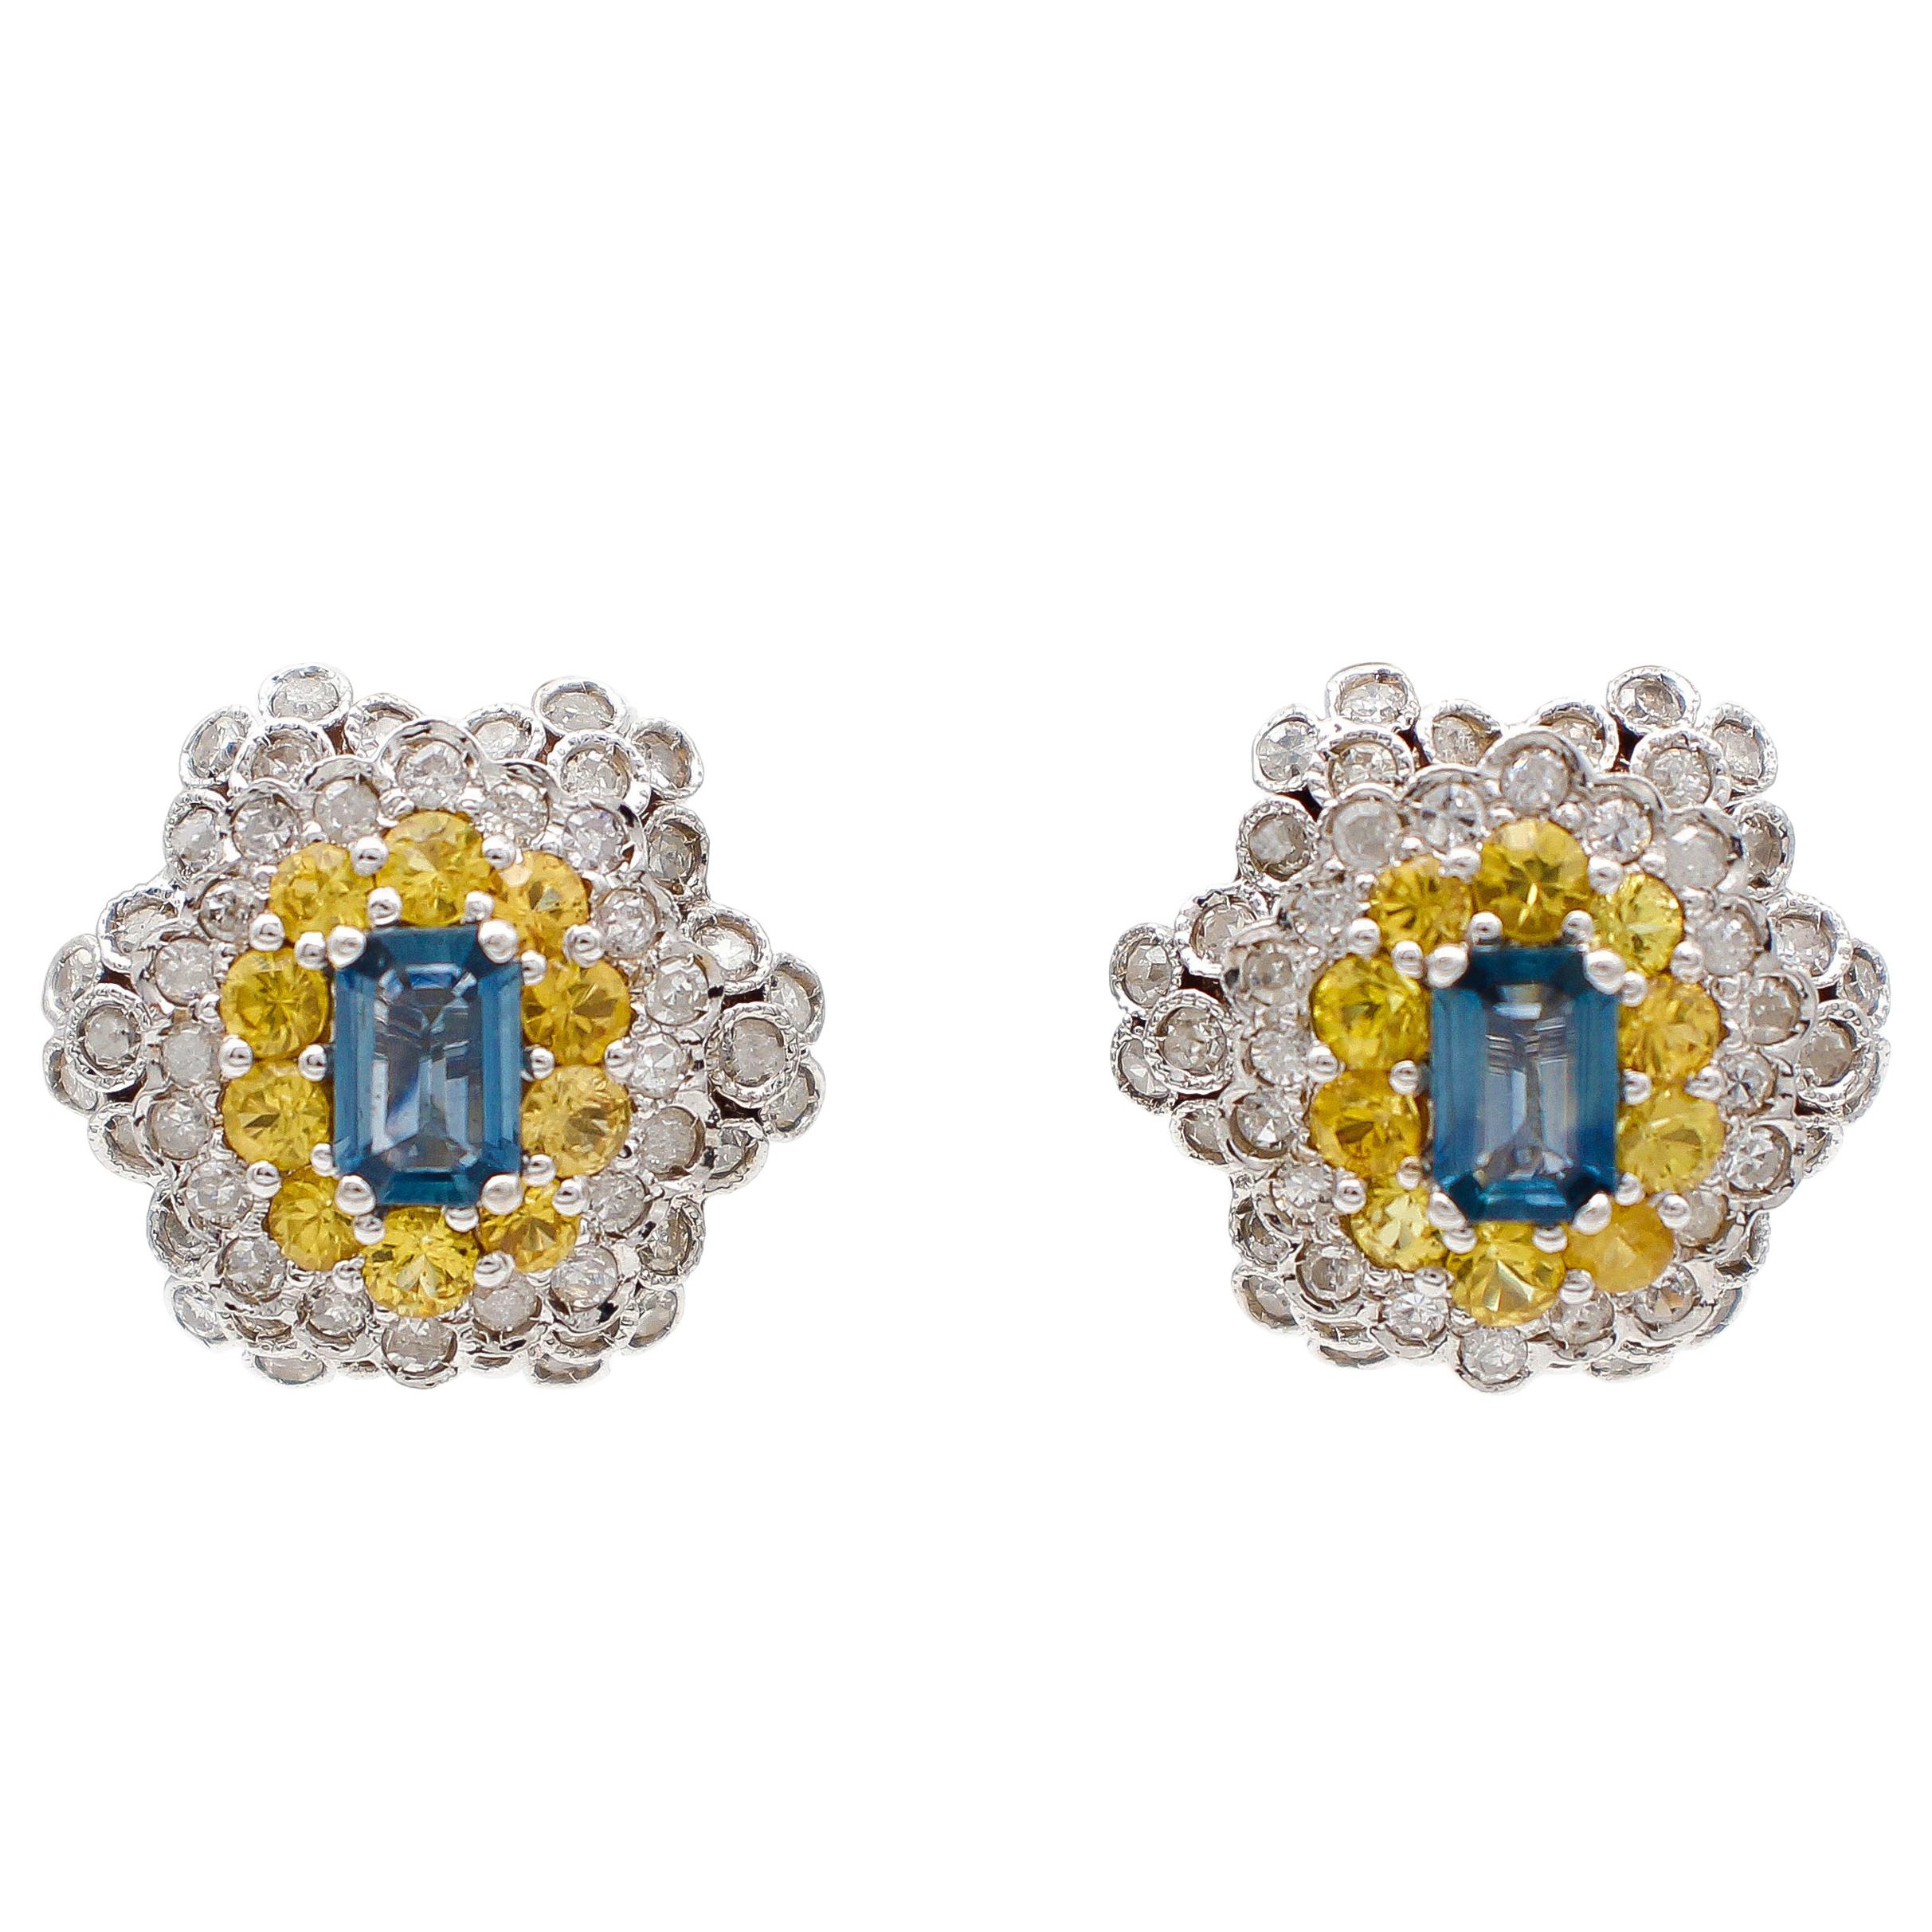 Diamonds, Yellow and Blue Sapphires, White Gold Clip-On Earrings